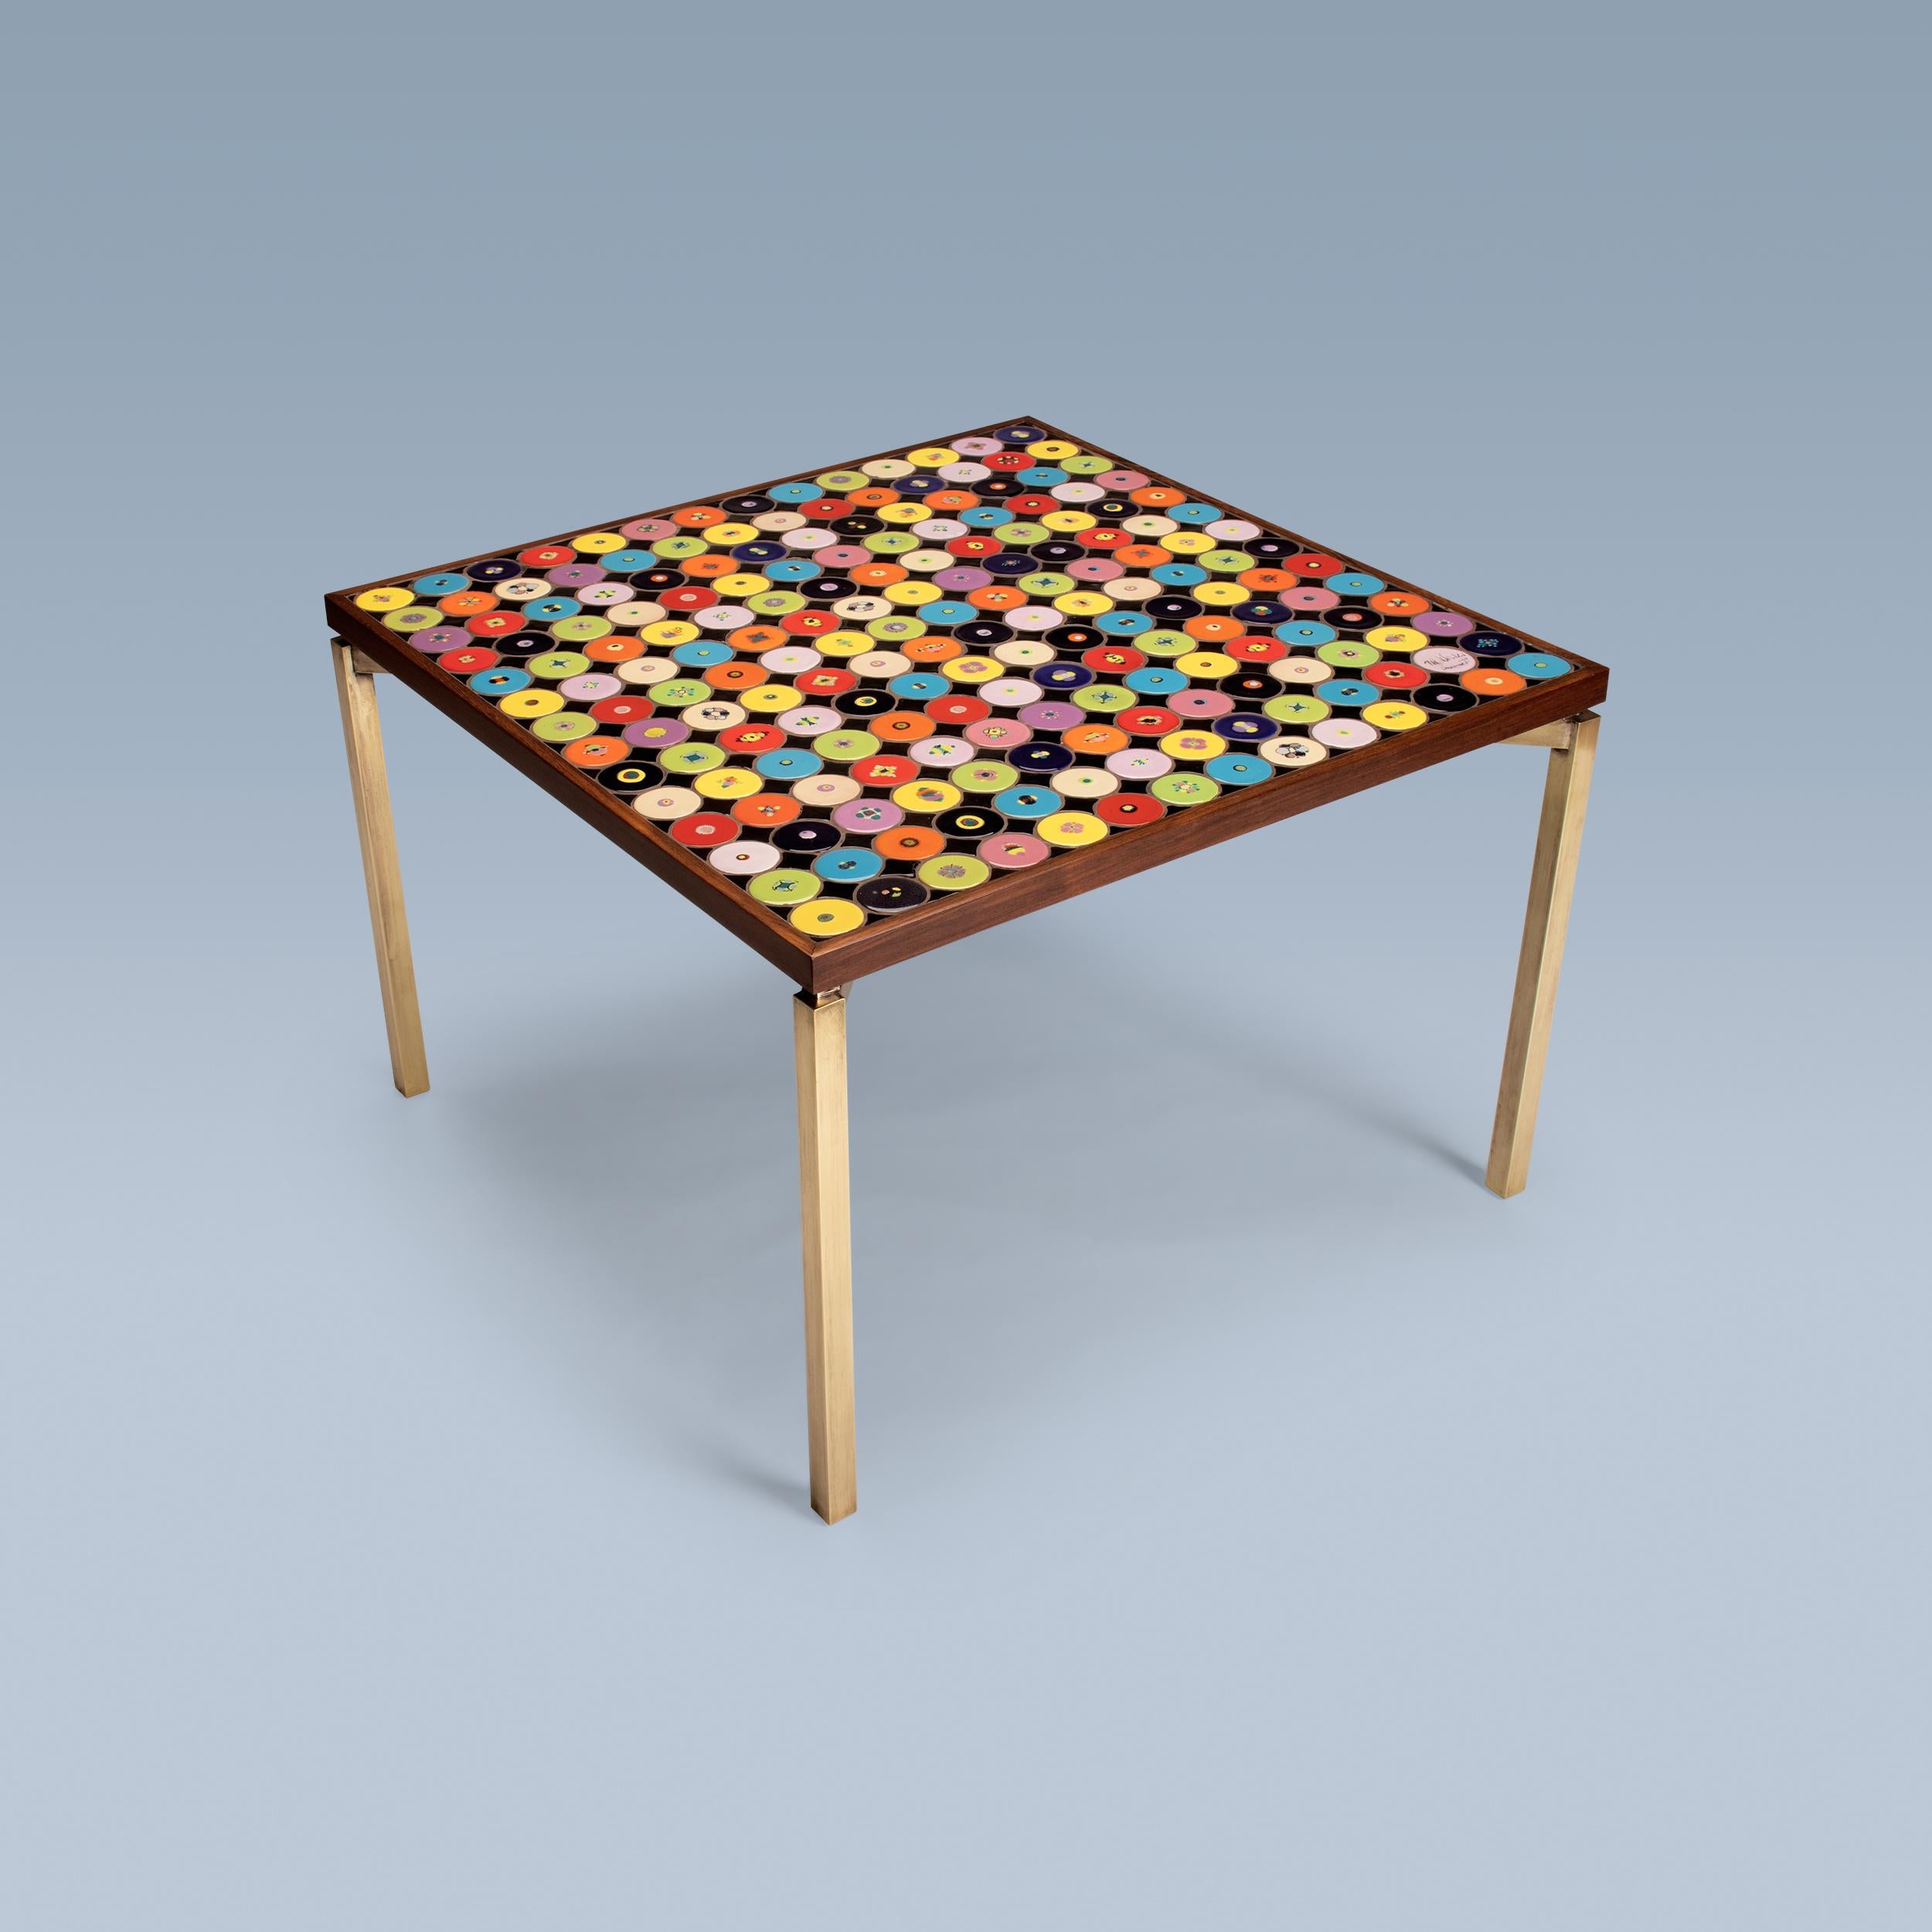 20th Century Danish modern coffee table with red, yellow, green, blue tiles and brass legs For Sale